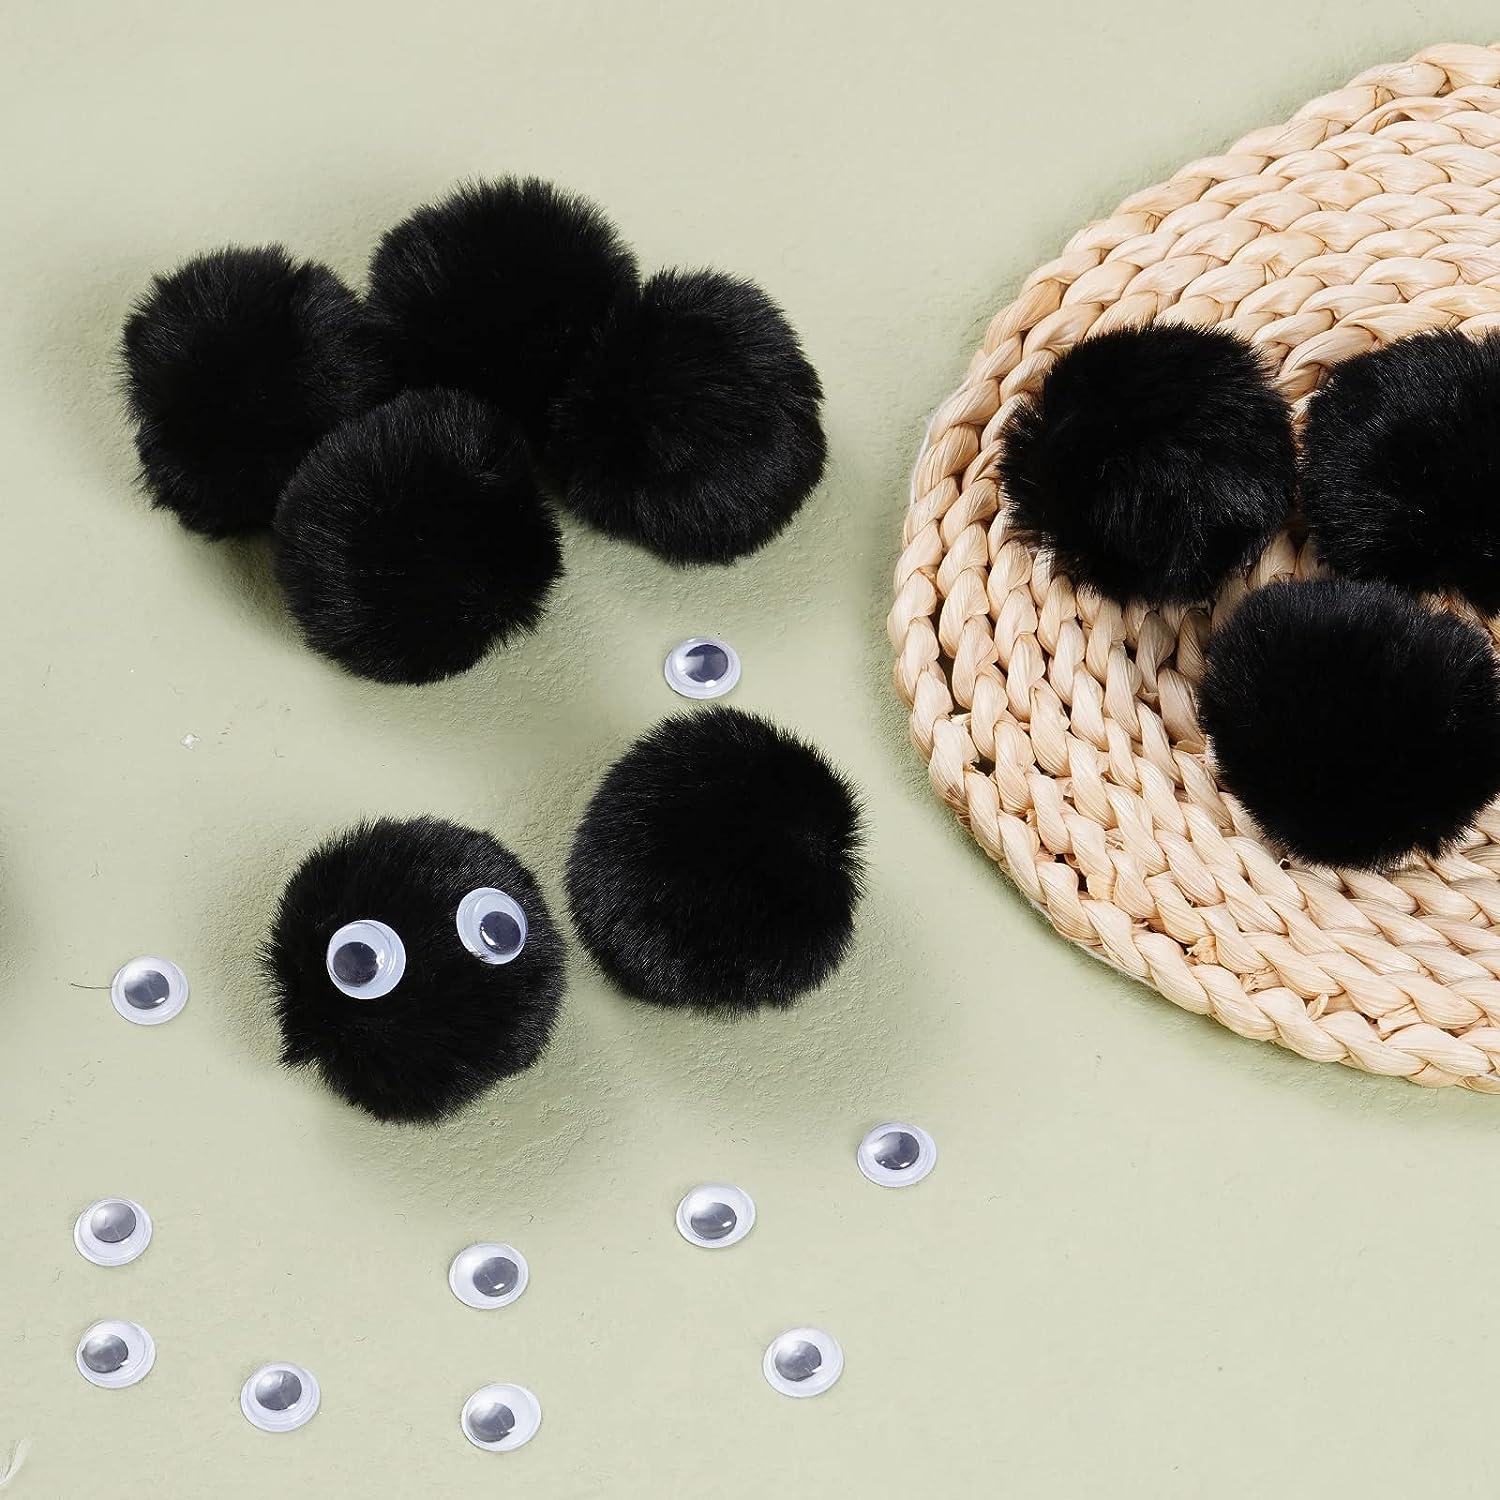  Miupoo Pom Poms with Eyes for Crafts,Halloween Costume Pompoms  Decorations with Googly Eyes, Fluffy Pom Pom Balls for Halloween  Accessories with Elastic Loop,20 Pieces,2 Inches,Black : Arts, Crafts &  Sewing